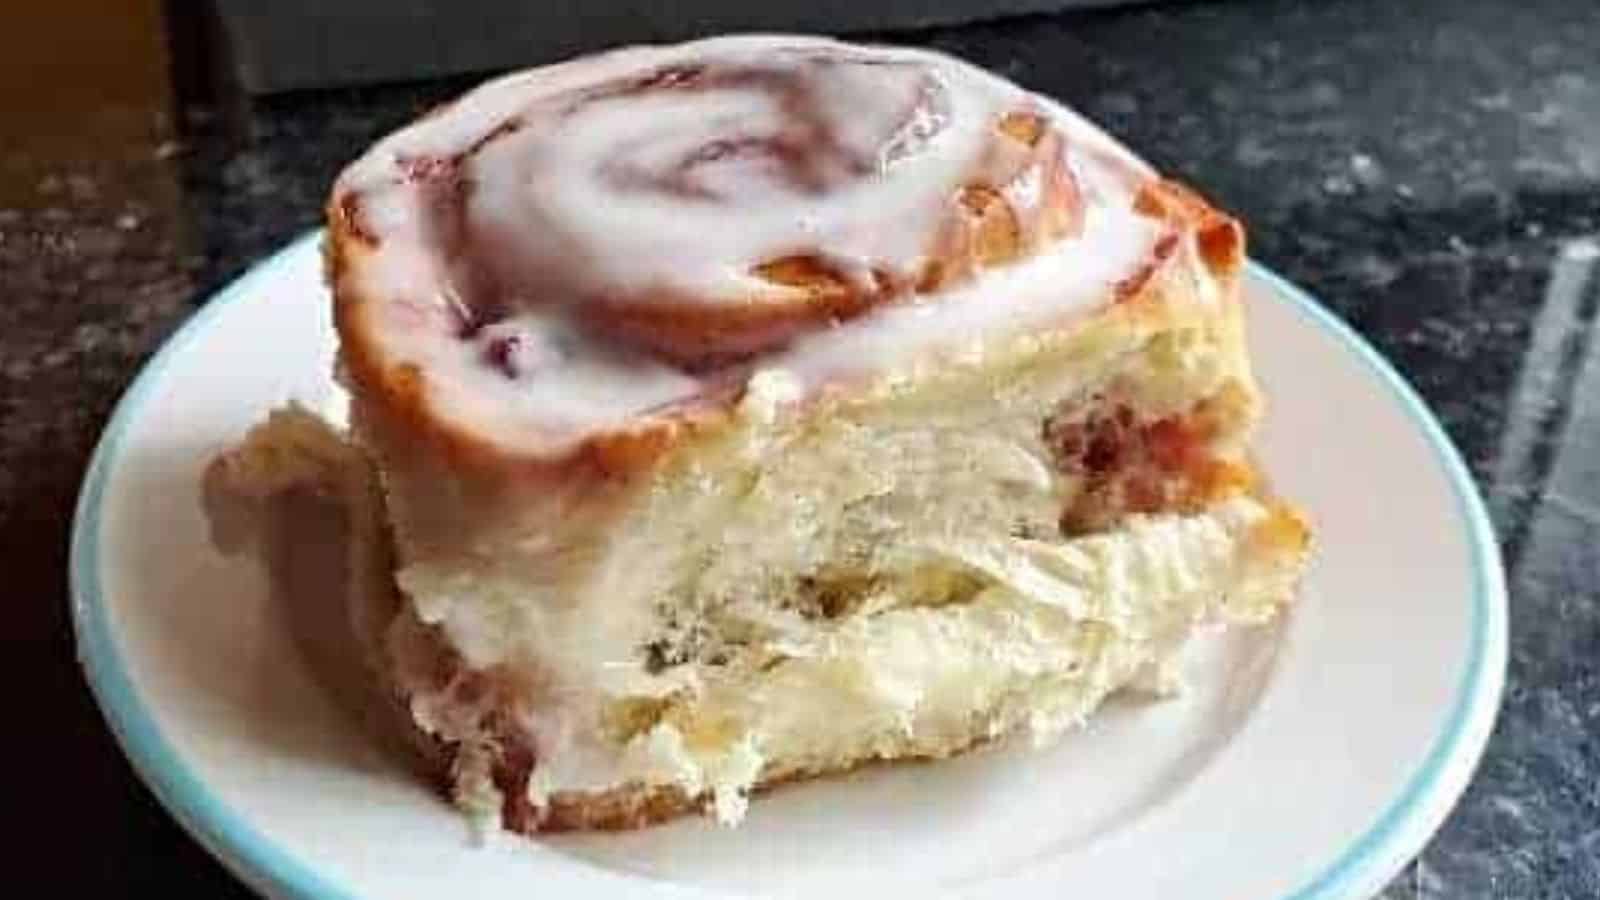 Image shows a closeup of a Cherry Cinnamon Roll on a small plate.